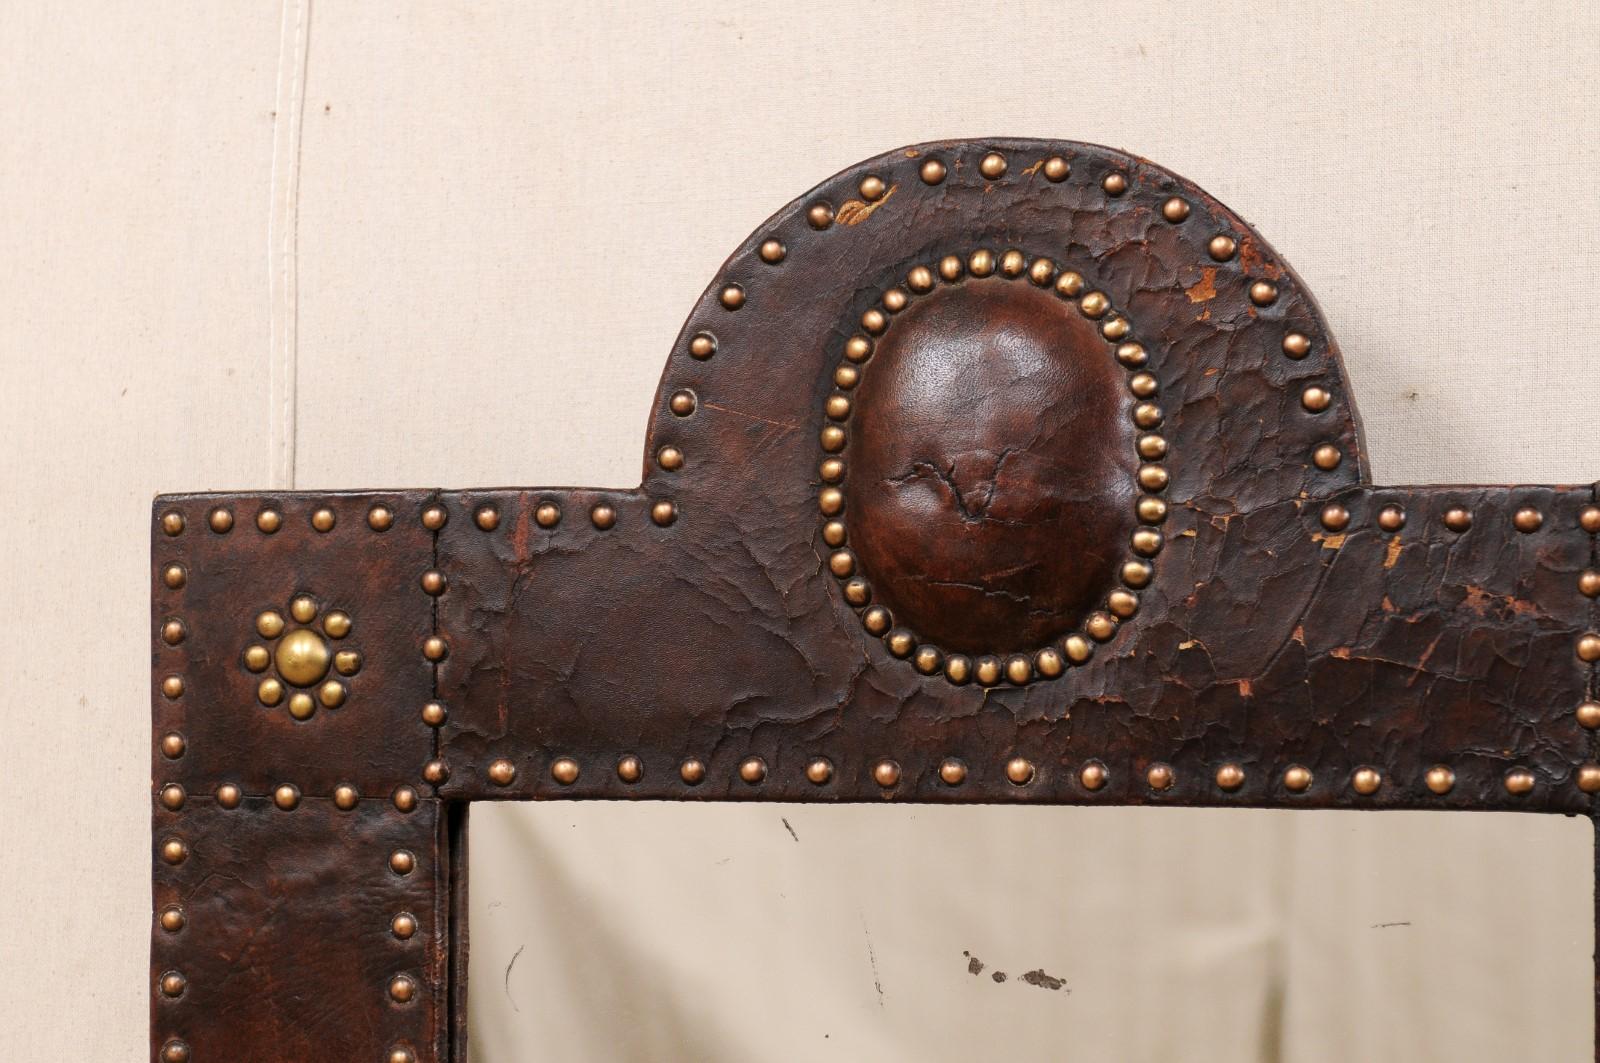 19th Century Spanish Leather Wrapped Mirror with Brass Nail-Head Accents, Mid to Late 19th C.